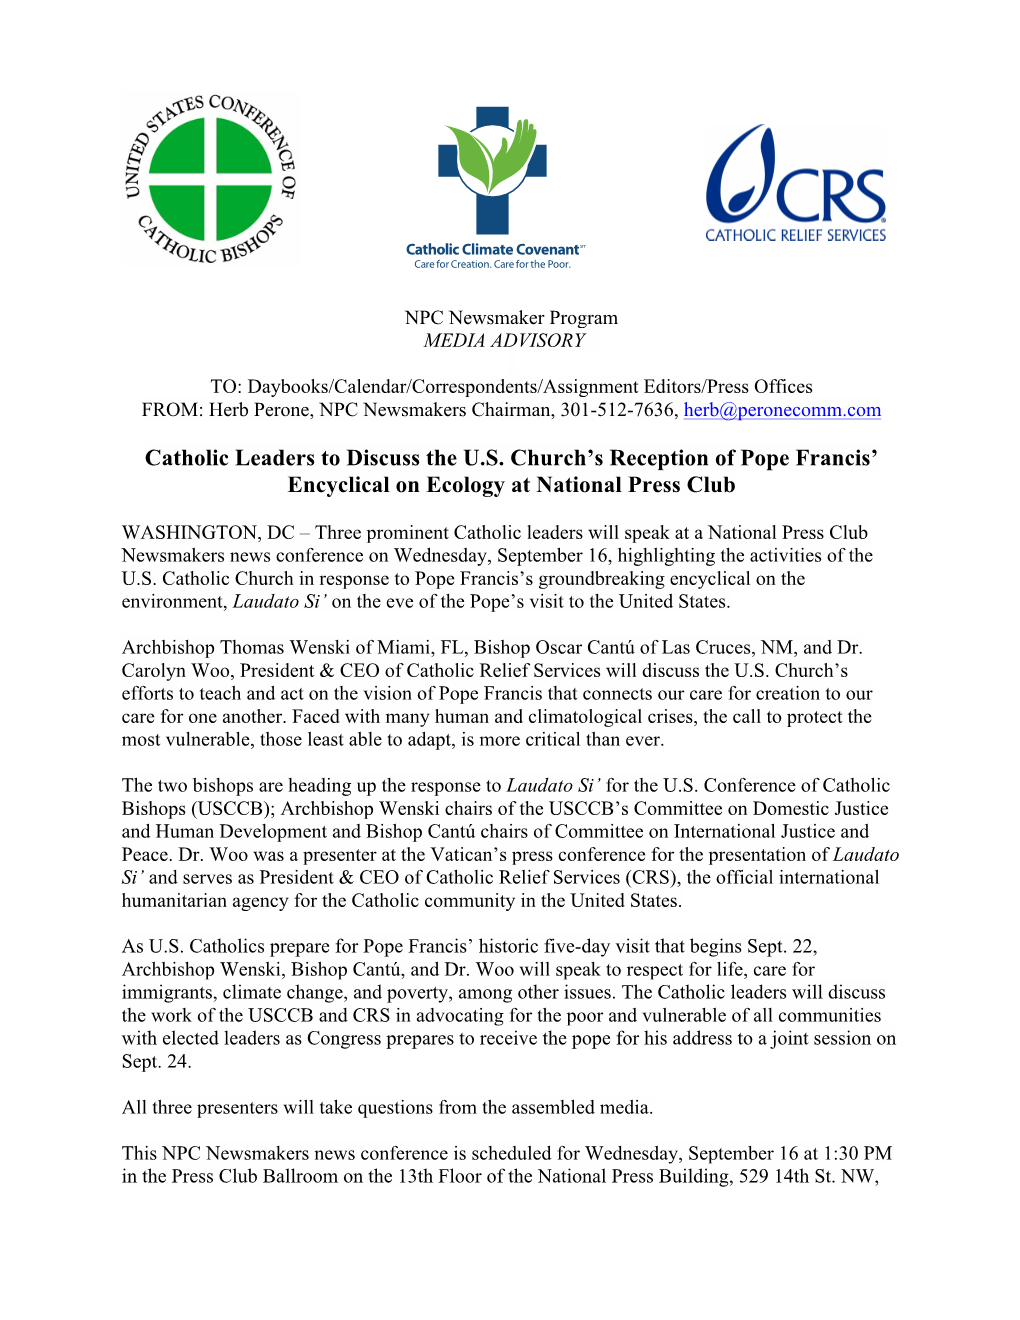 Catholic Leaders to Discuss the U.S. Church's Reception of Pope Francis' Encyclical on Ecology at National Press Club